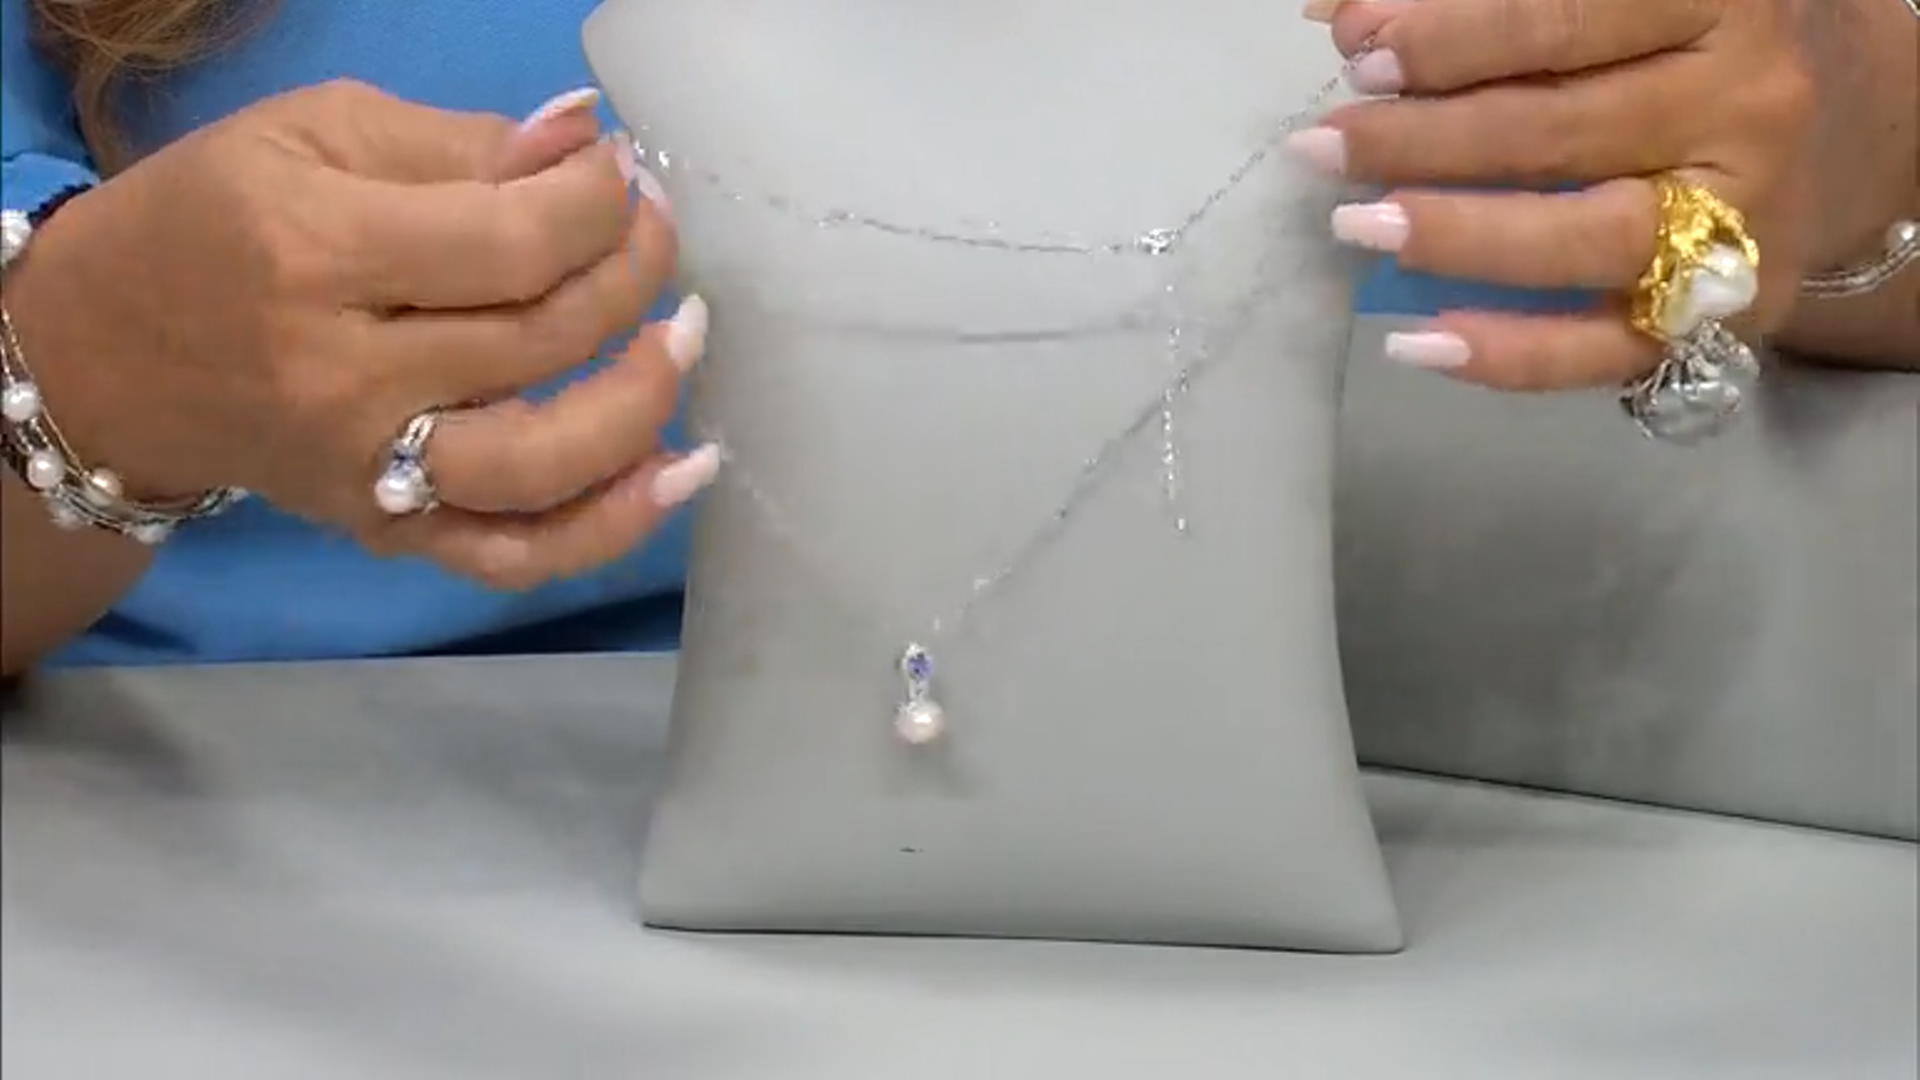 White Cultured Freshwater Pearl With Tanzanite & Zircon Rhodium Over Silver Pendant With Chain Video Thumbnail